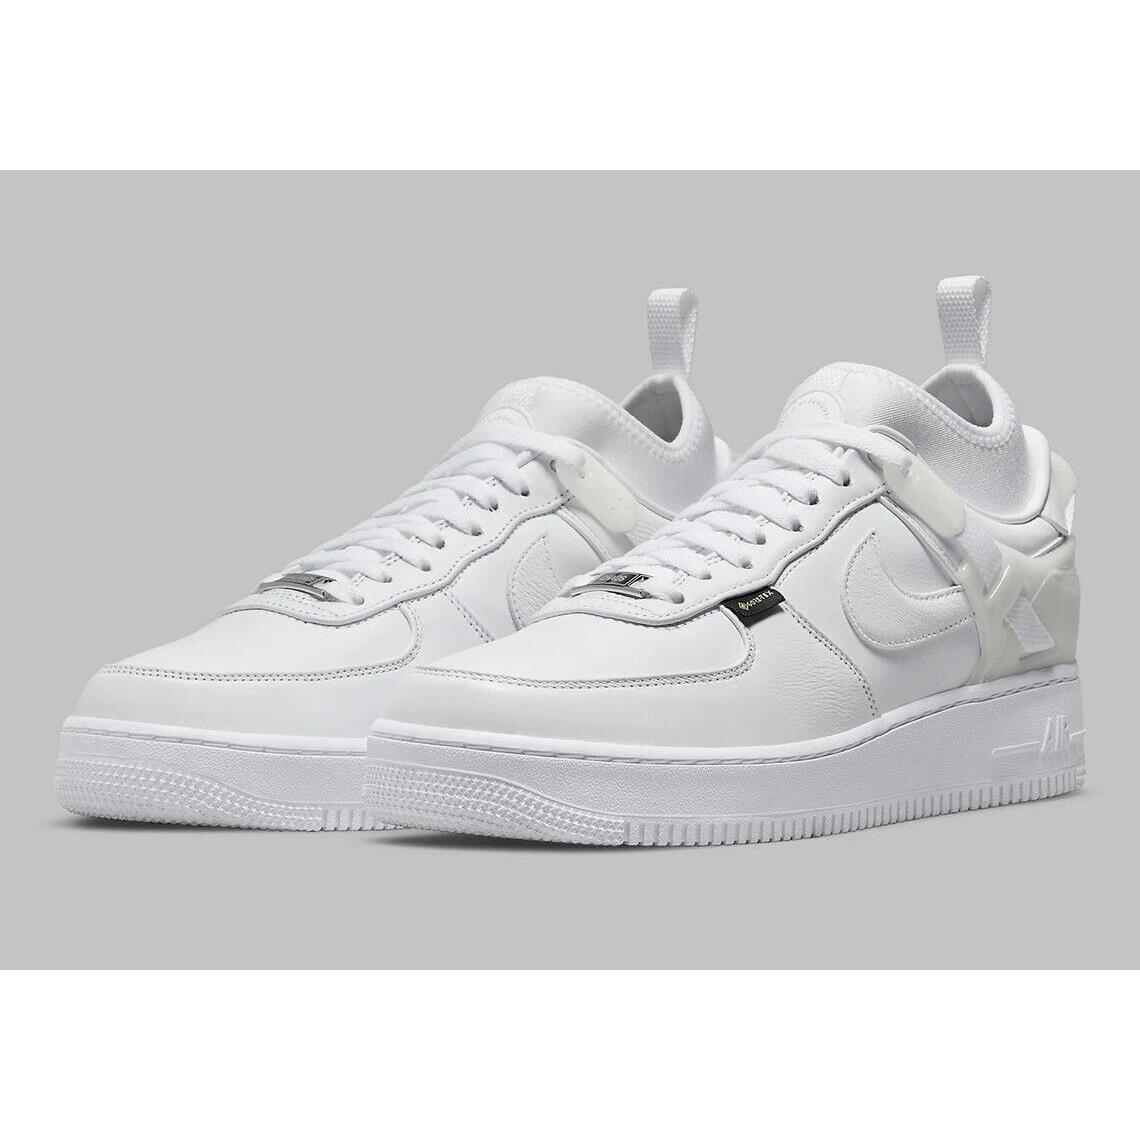 Nike Air Force 1 Low SP Gtx X Undercover Shoes White Sail DQ7558-101 Men`s